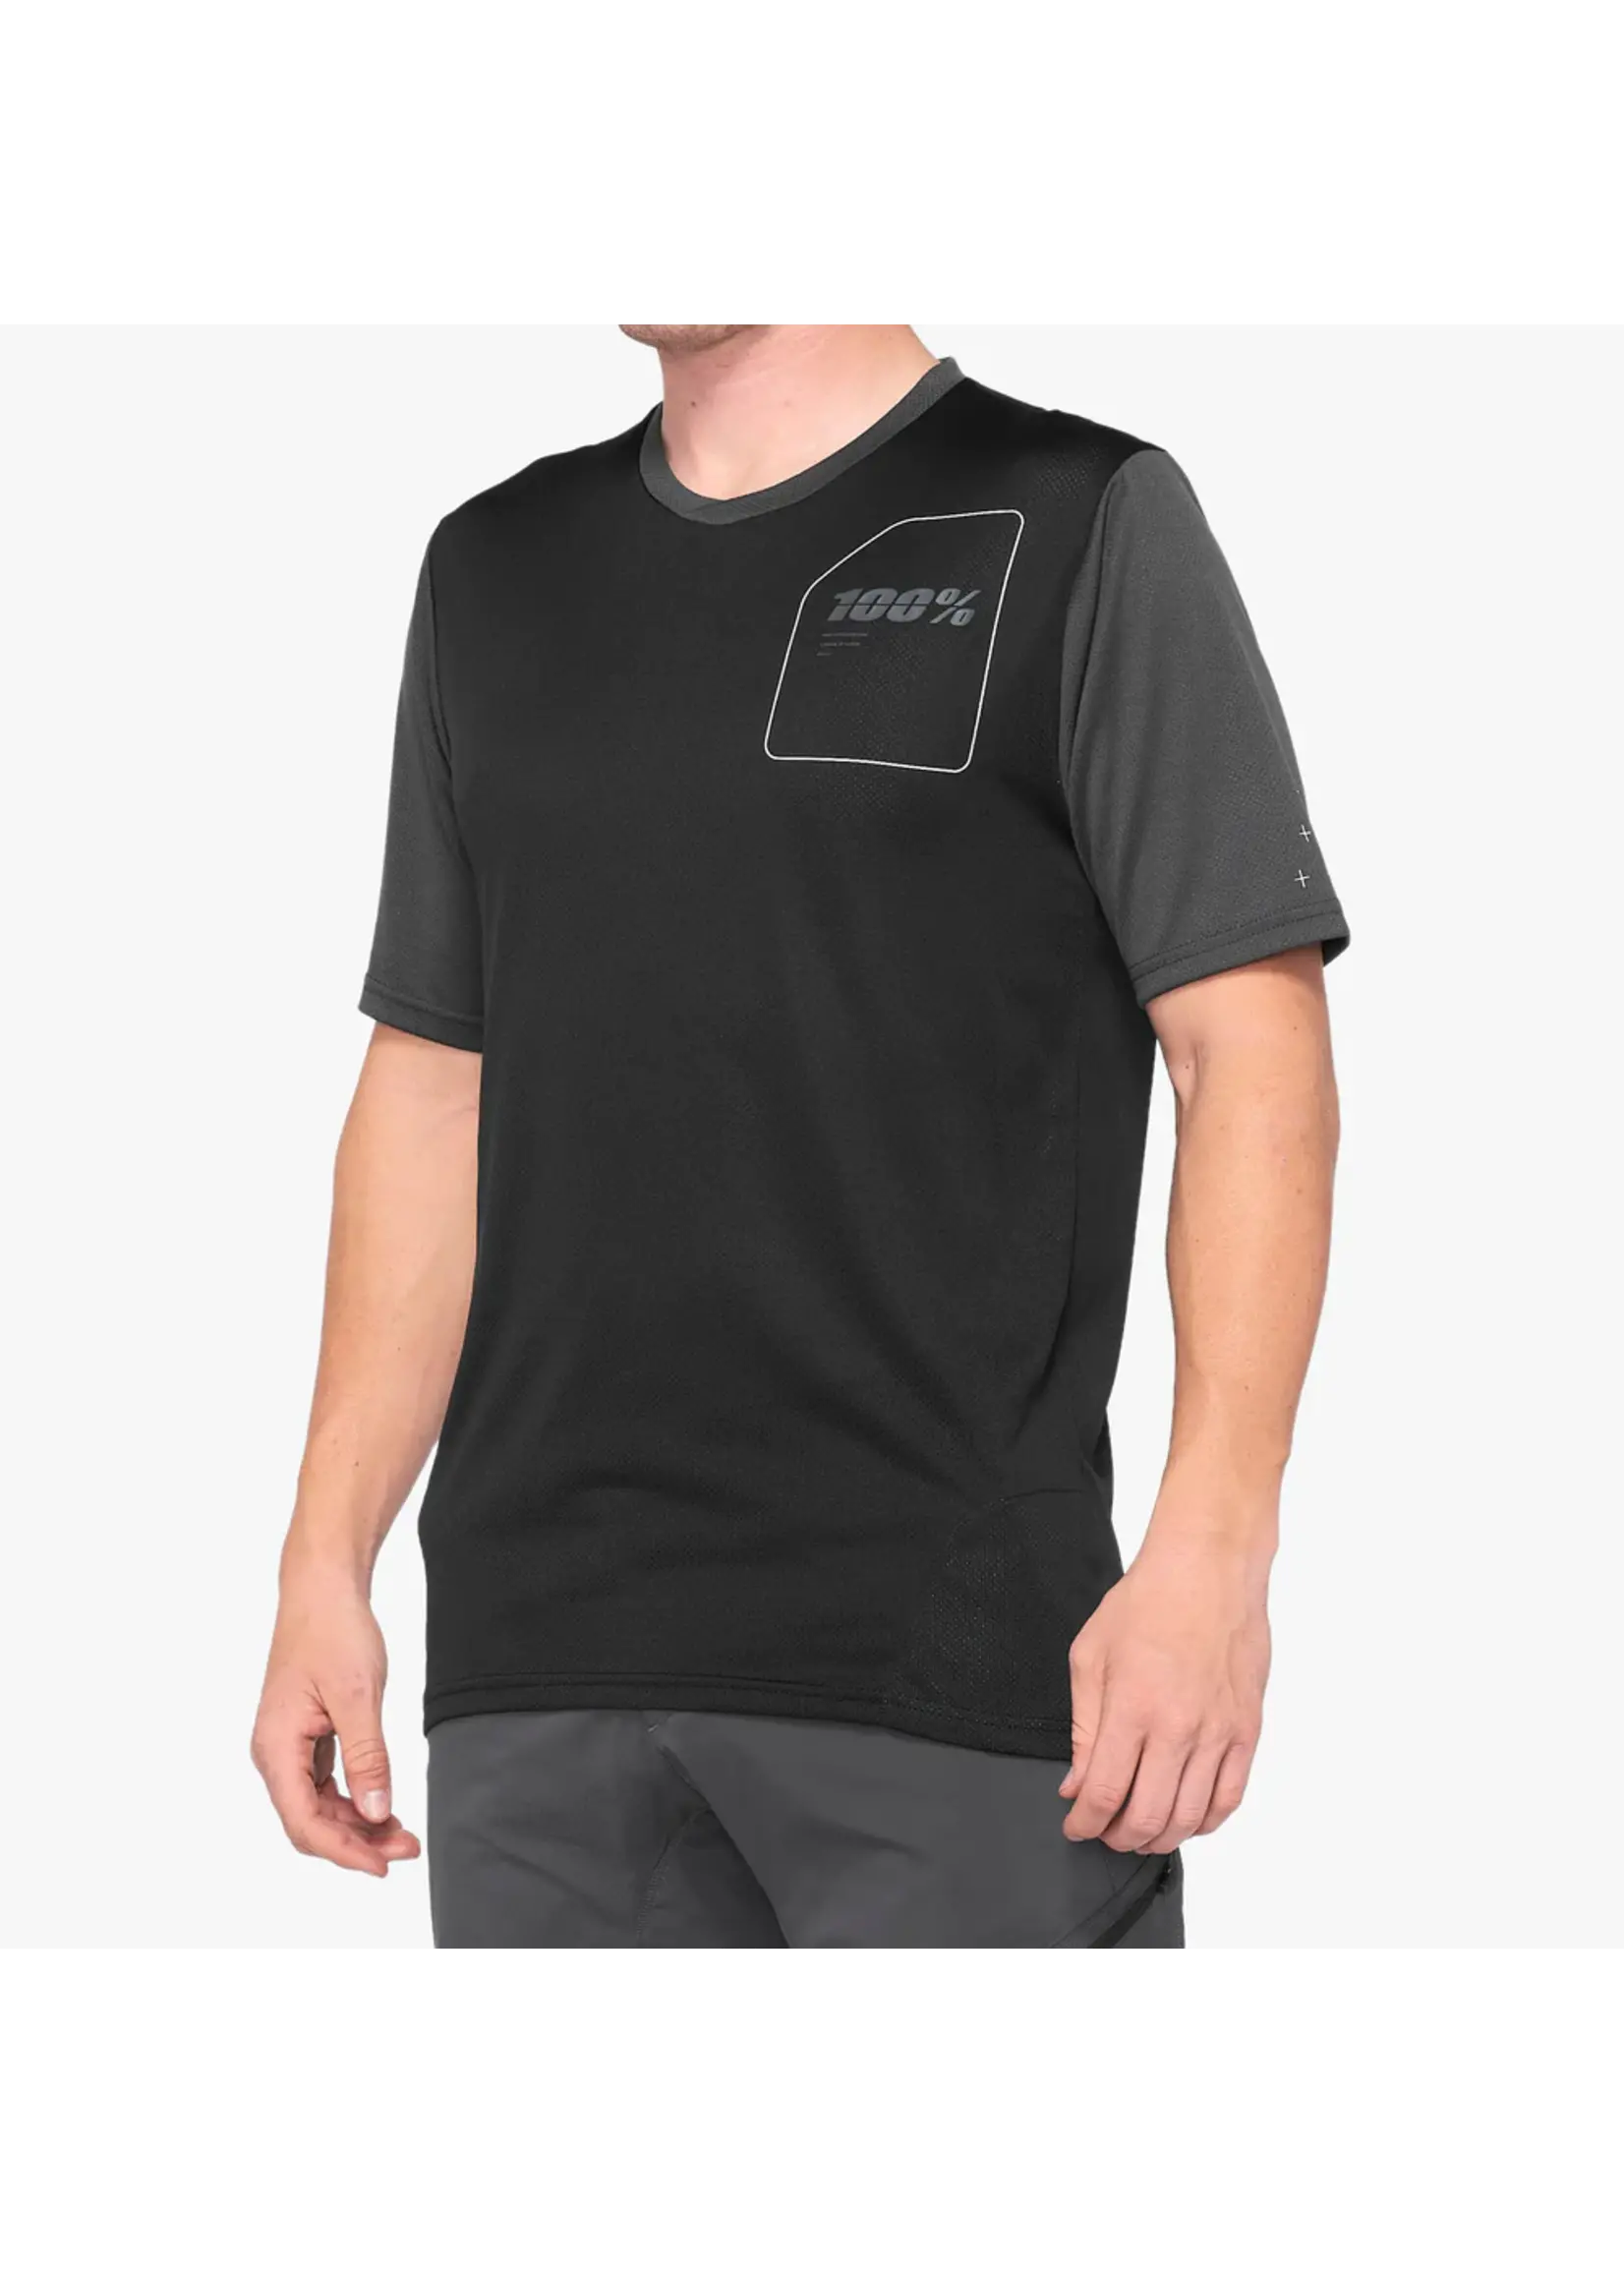 100 Percent 100% Ridecamp All Mountain Short Sleeve Jersey Black/Charcoal